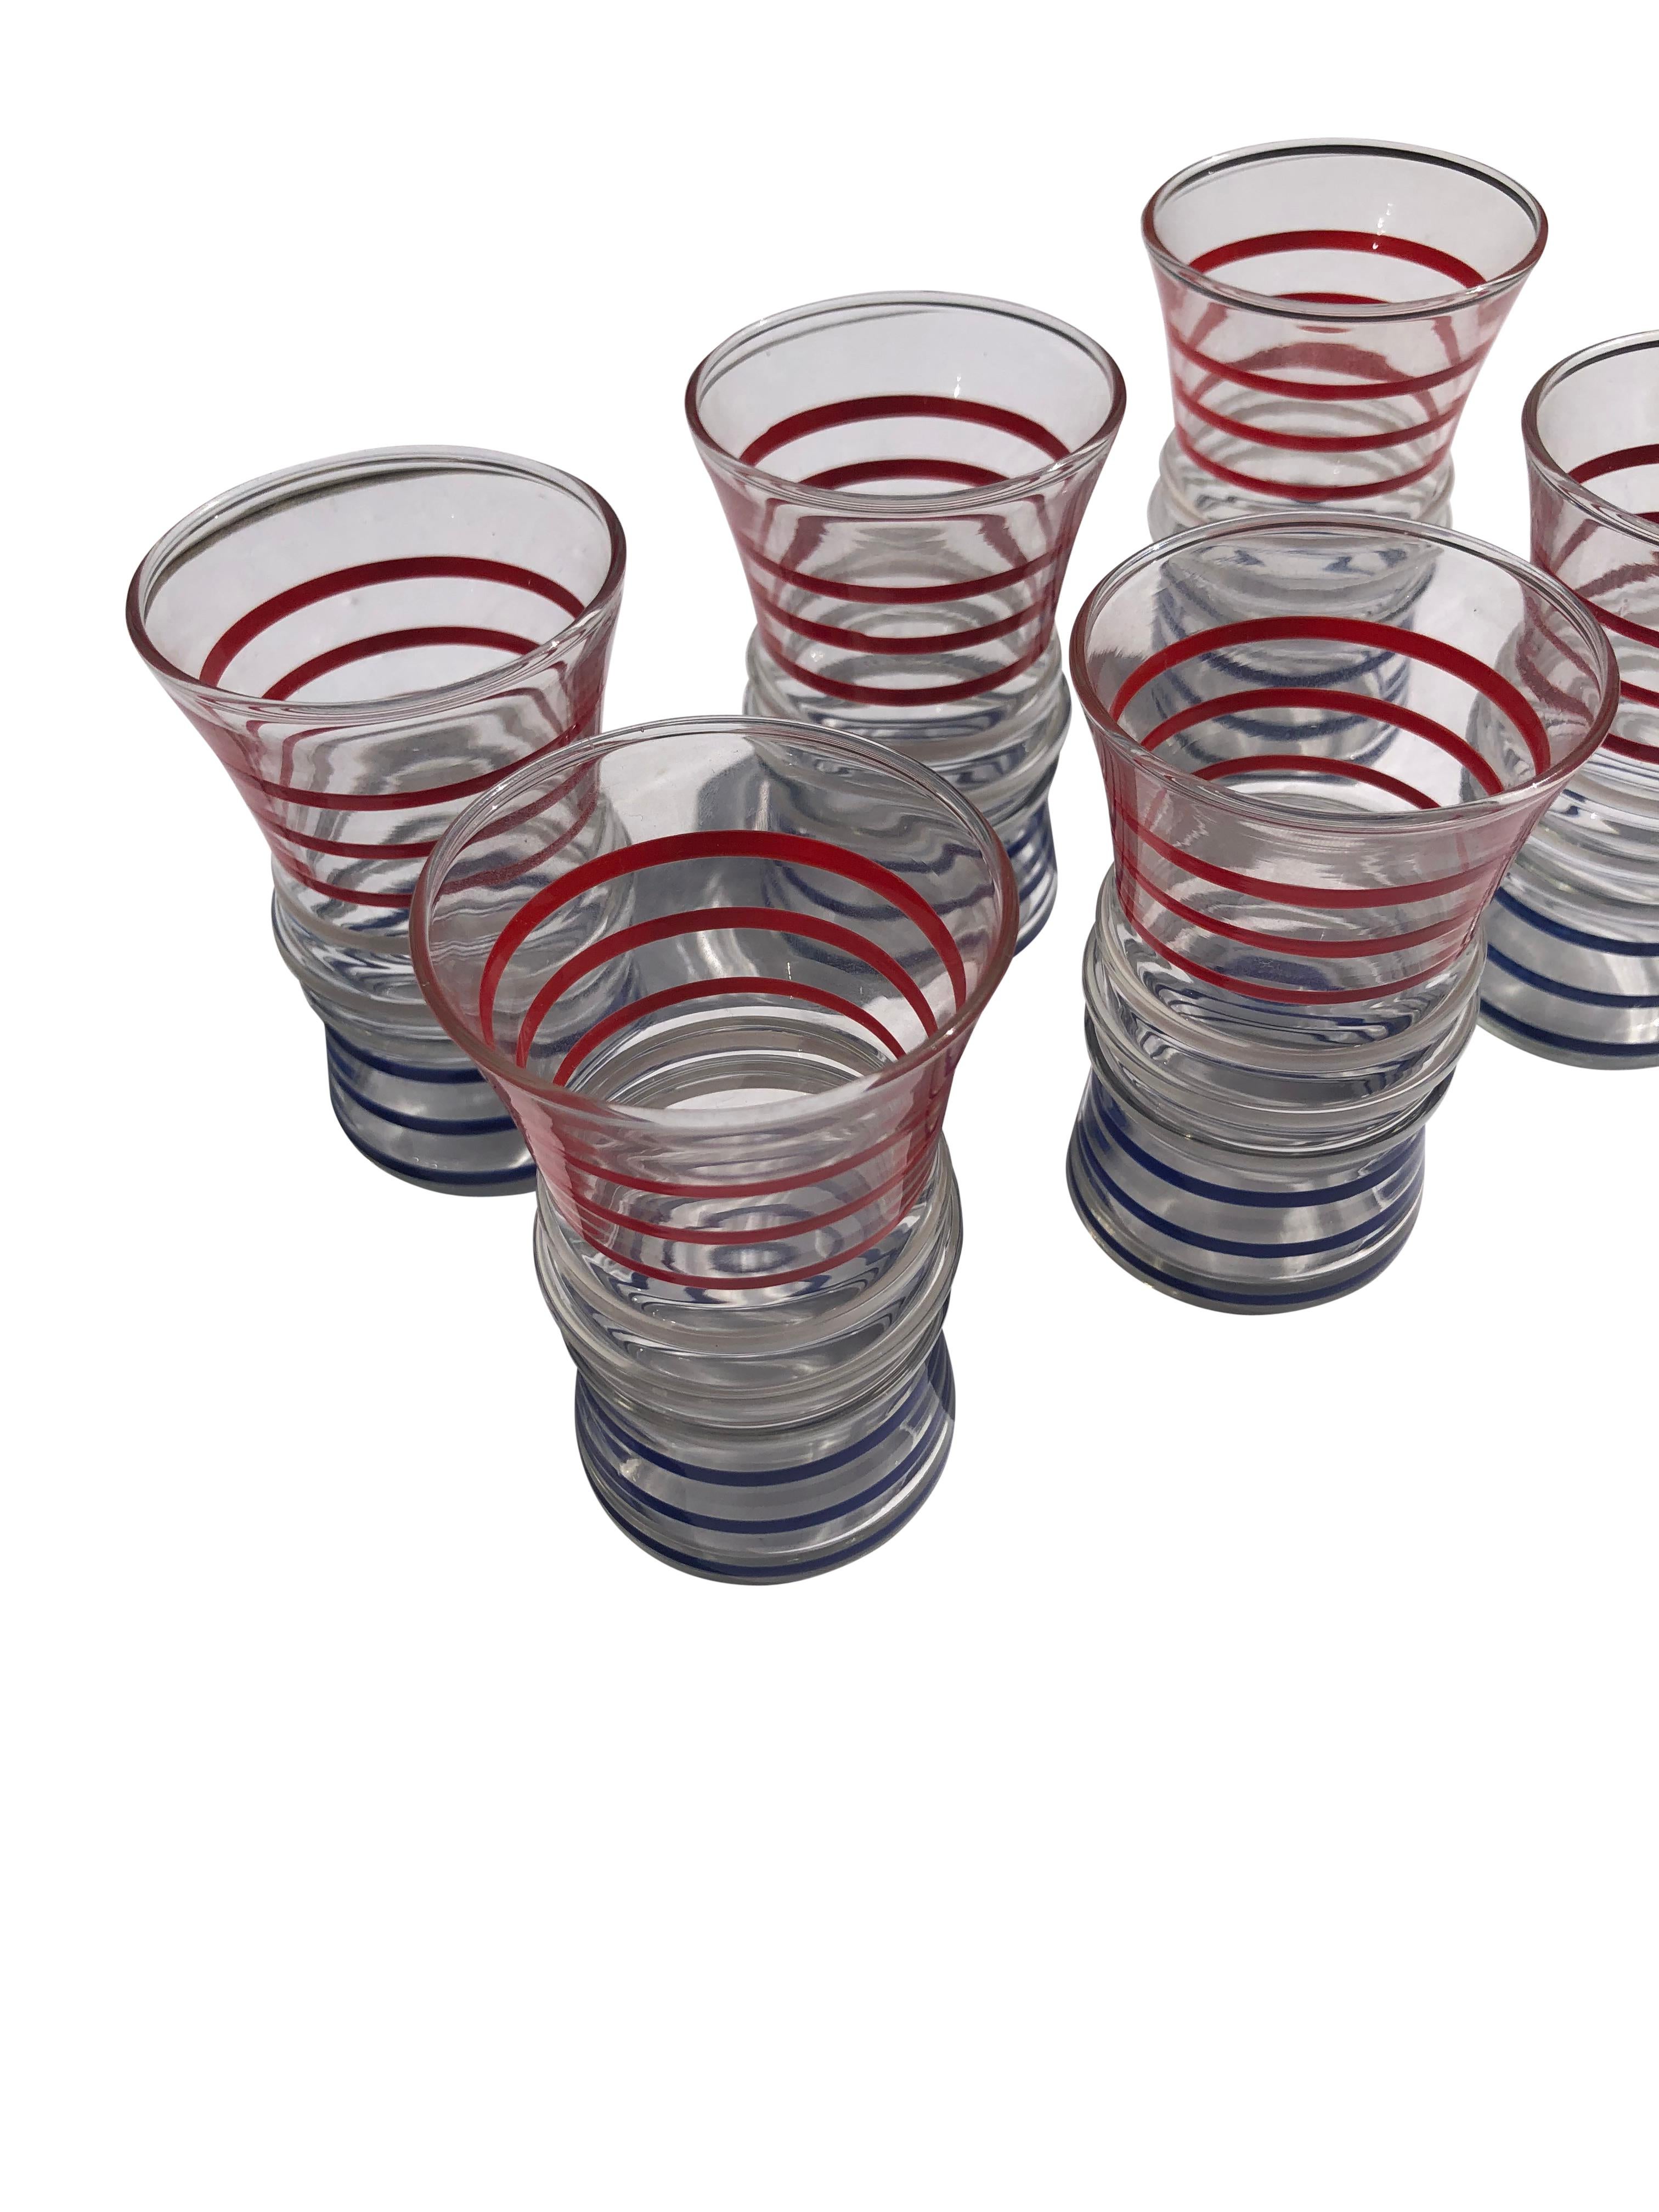 Set of 6 festive and patriotic 4 oz. tumblers decorated with raised bands each with  3 blue bands, 3 white bands, and 3 red bands. Glasses are flared, measuring 2.375” at top and 2” at bottom. 
